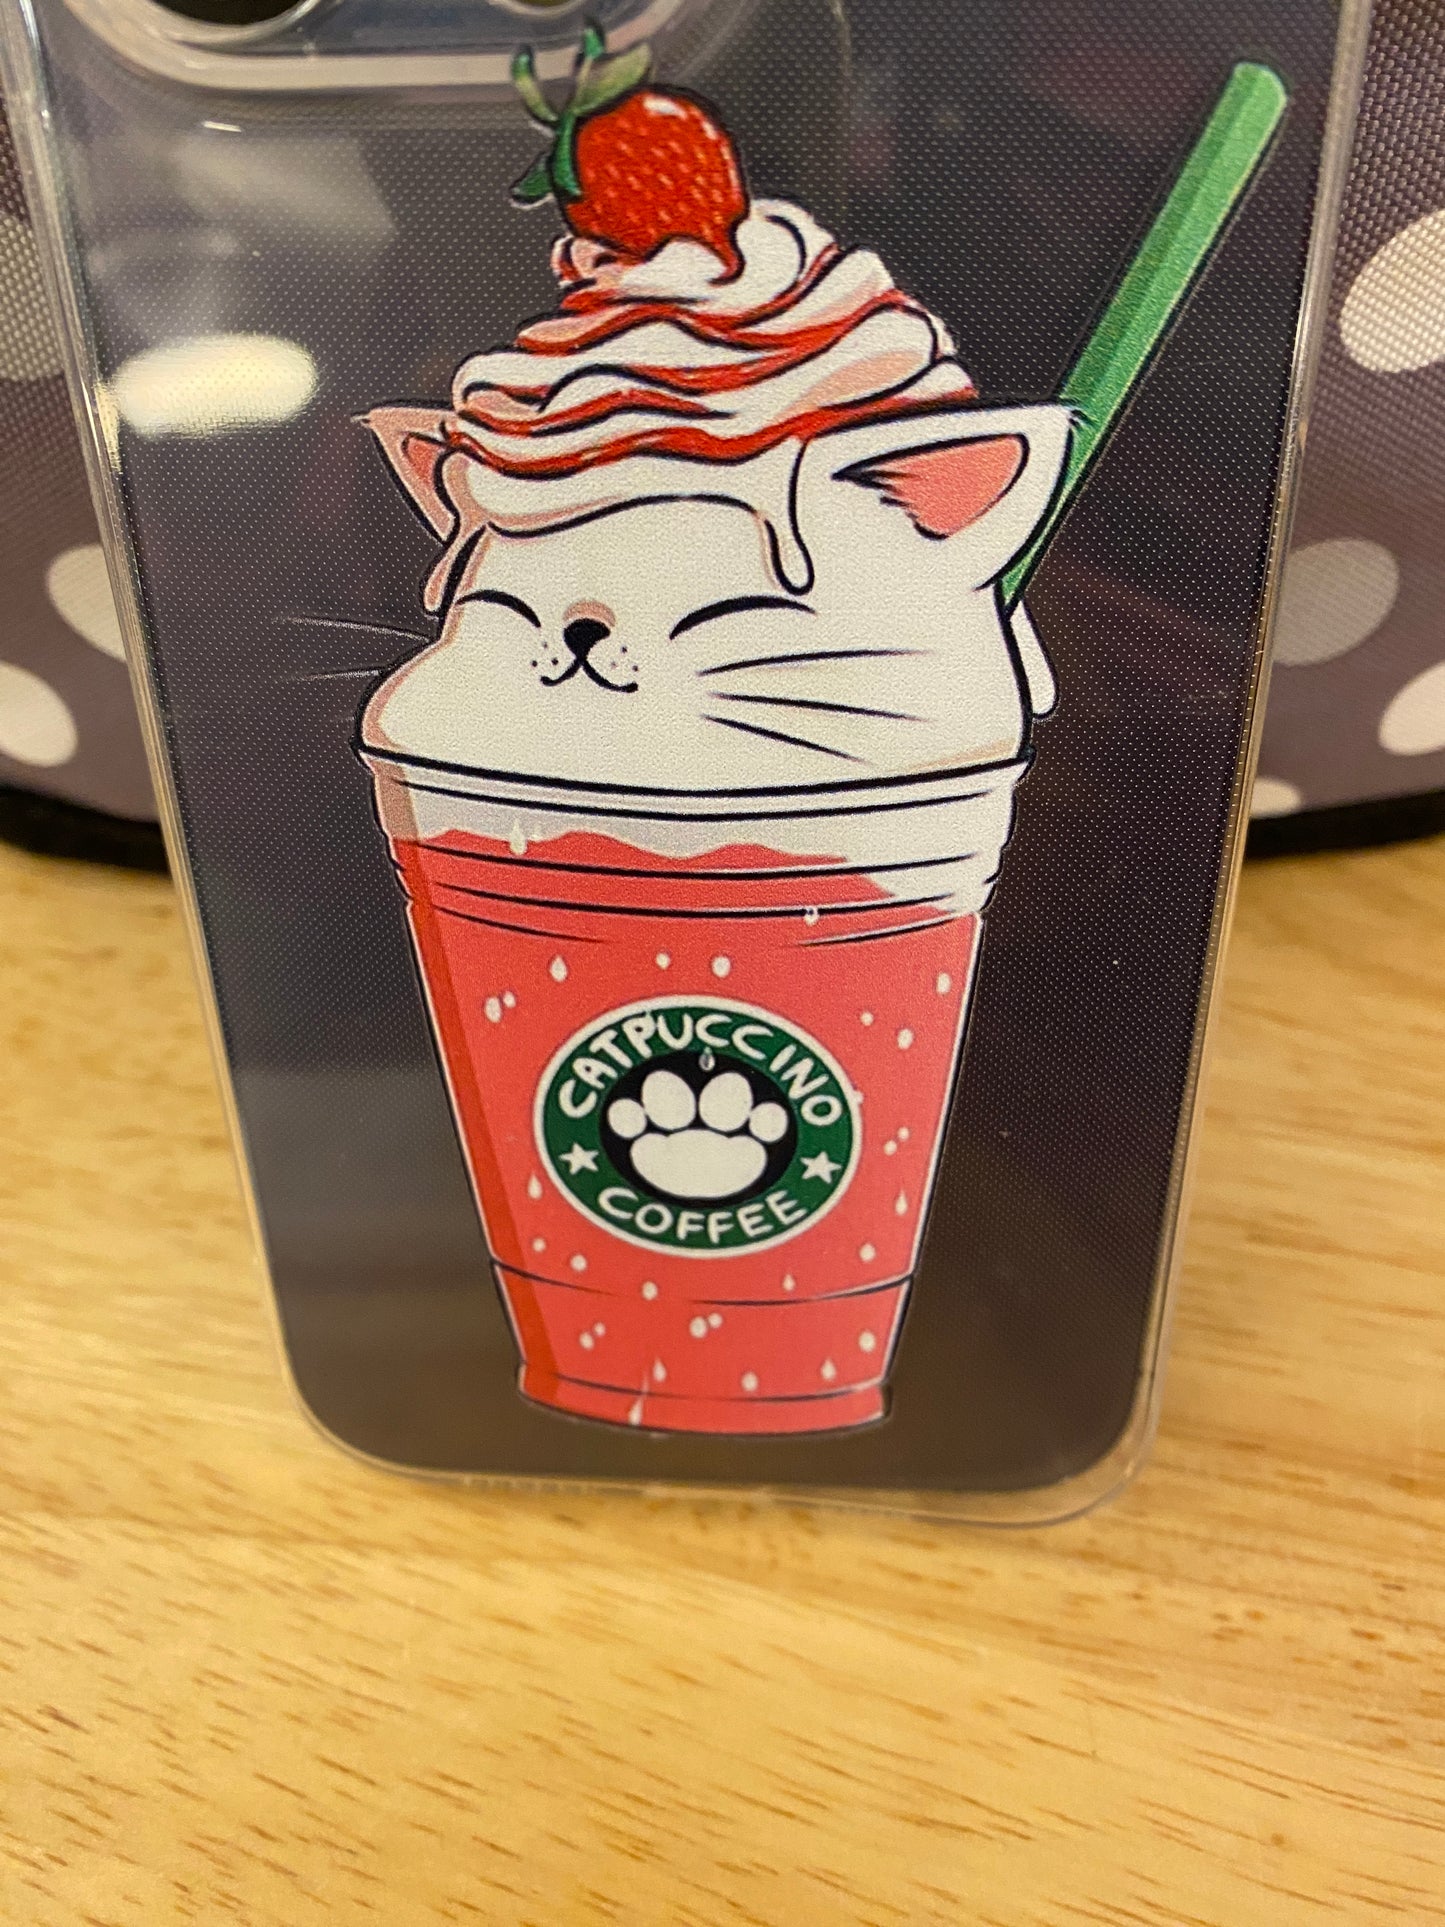 Strawberry Cat Catpuccino Coffee Starbucks IPhone case with matching sticker